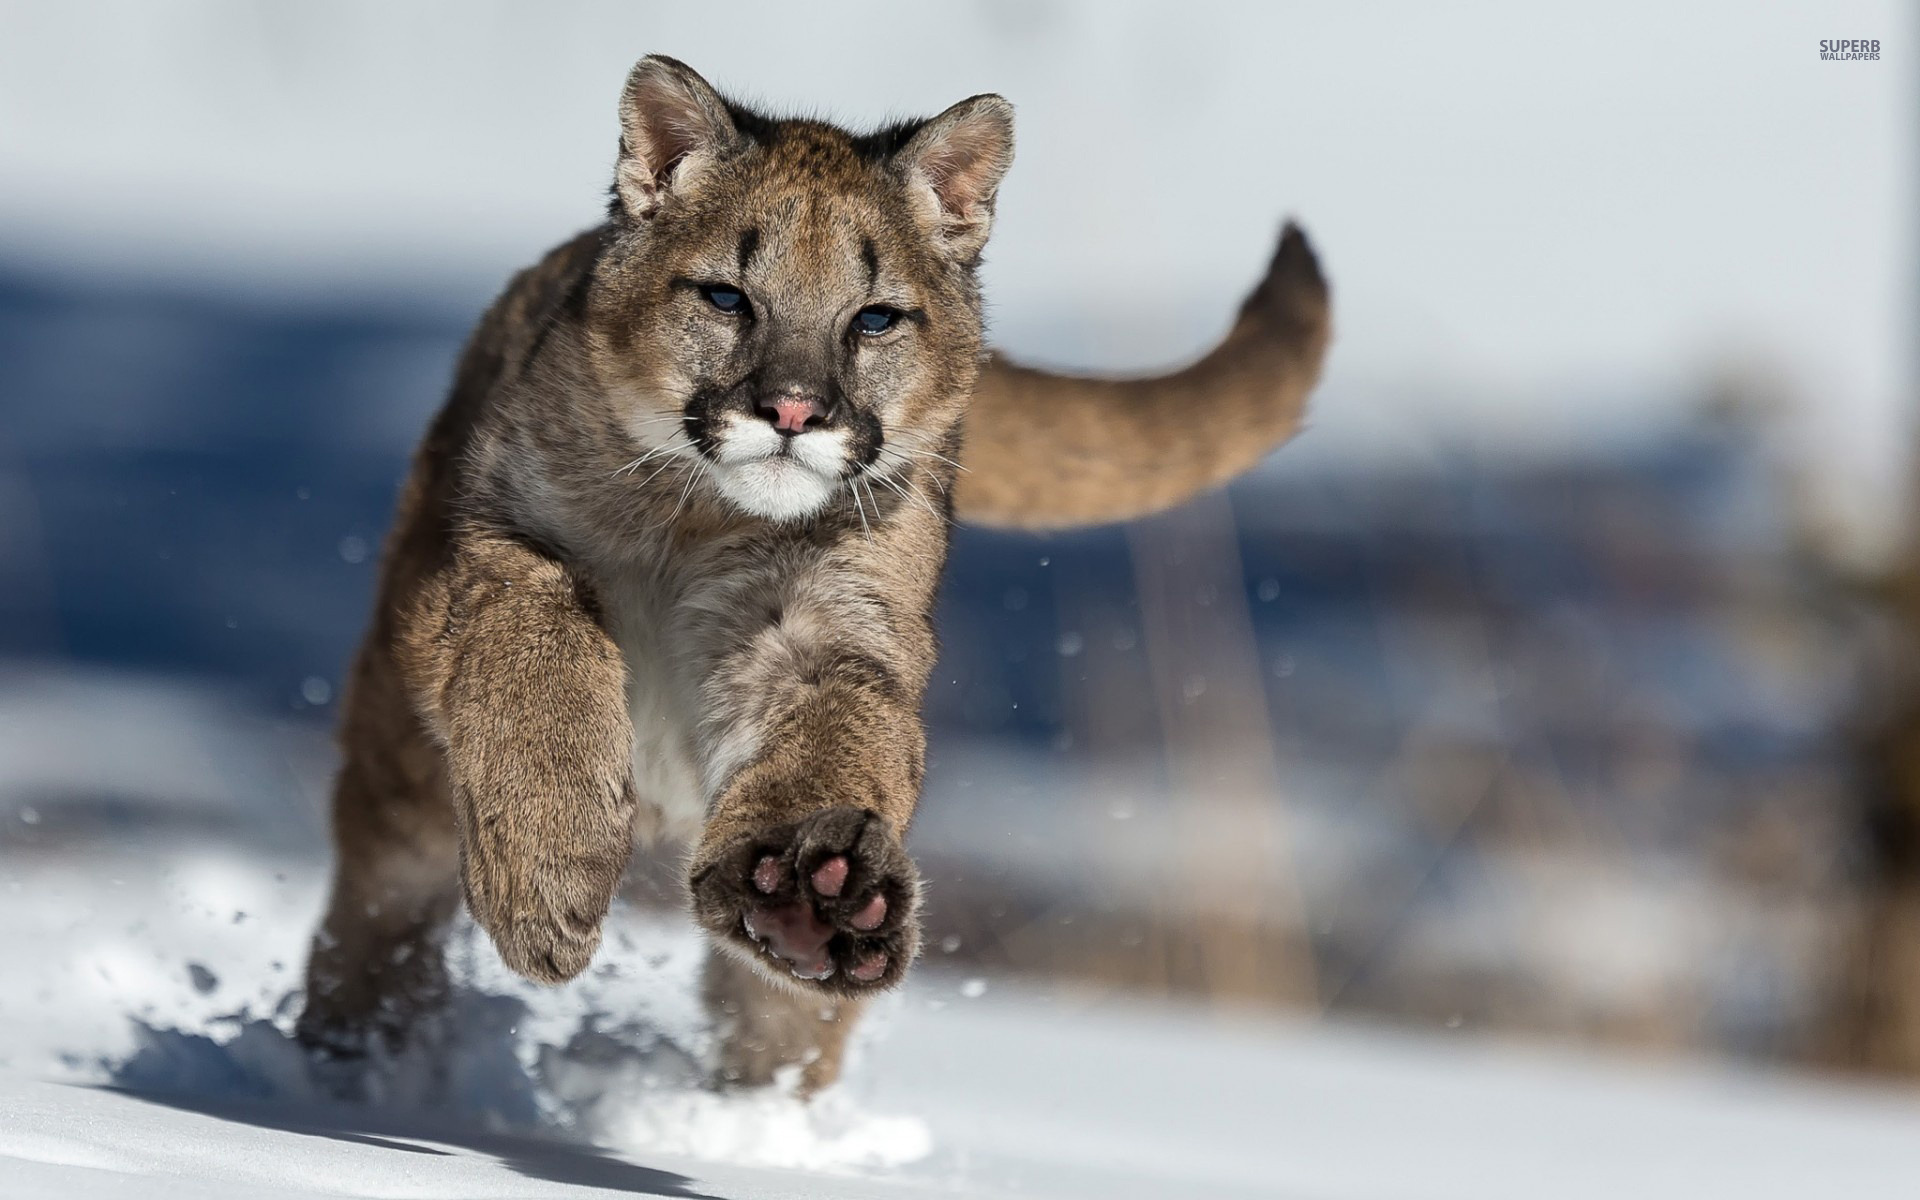 Cougar running in the snow wallpaper - Animal wallpapers - #45665